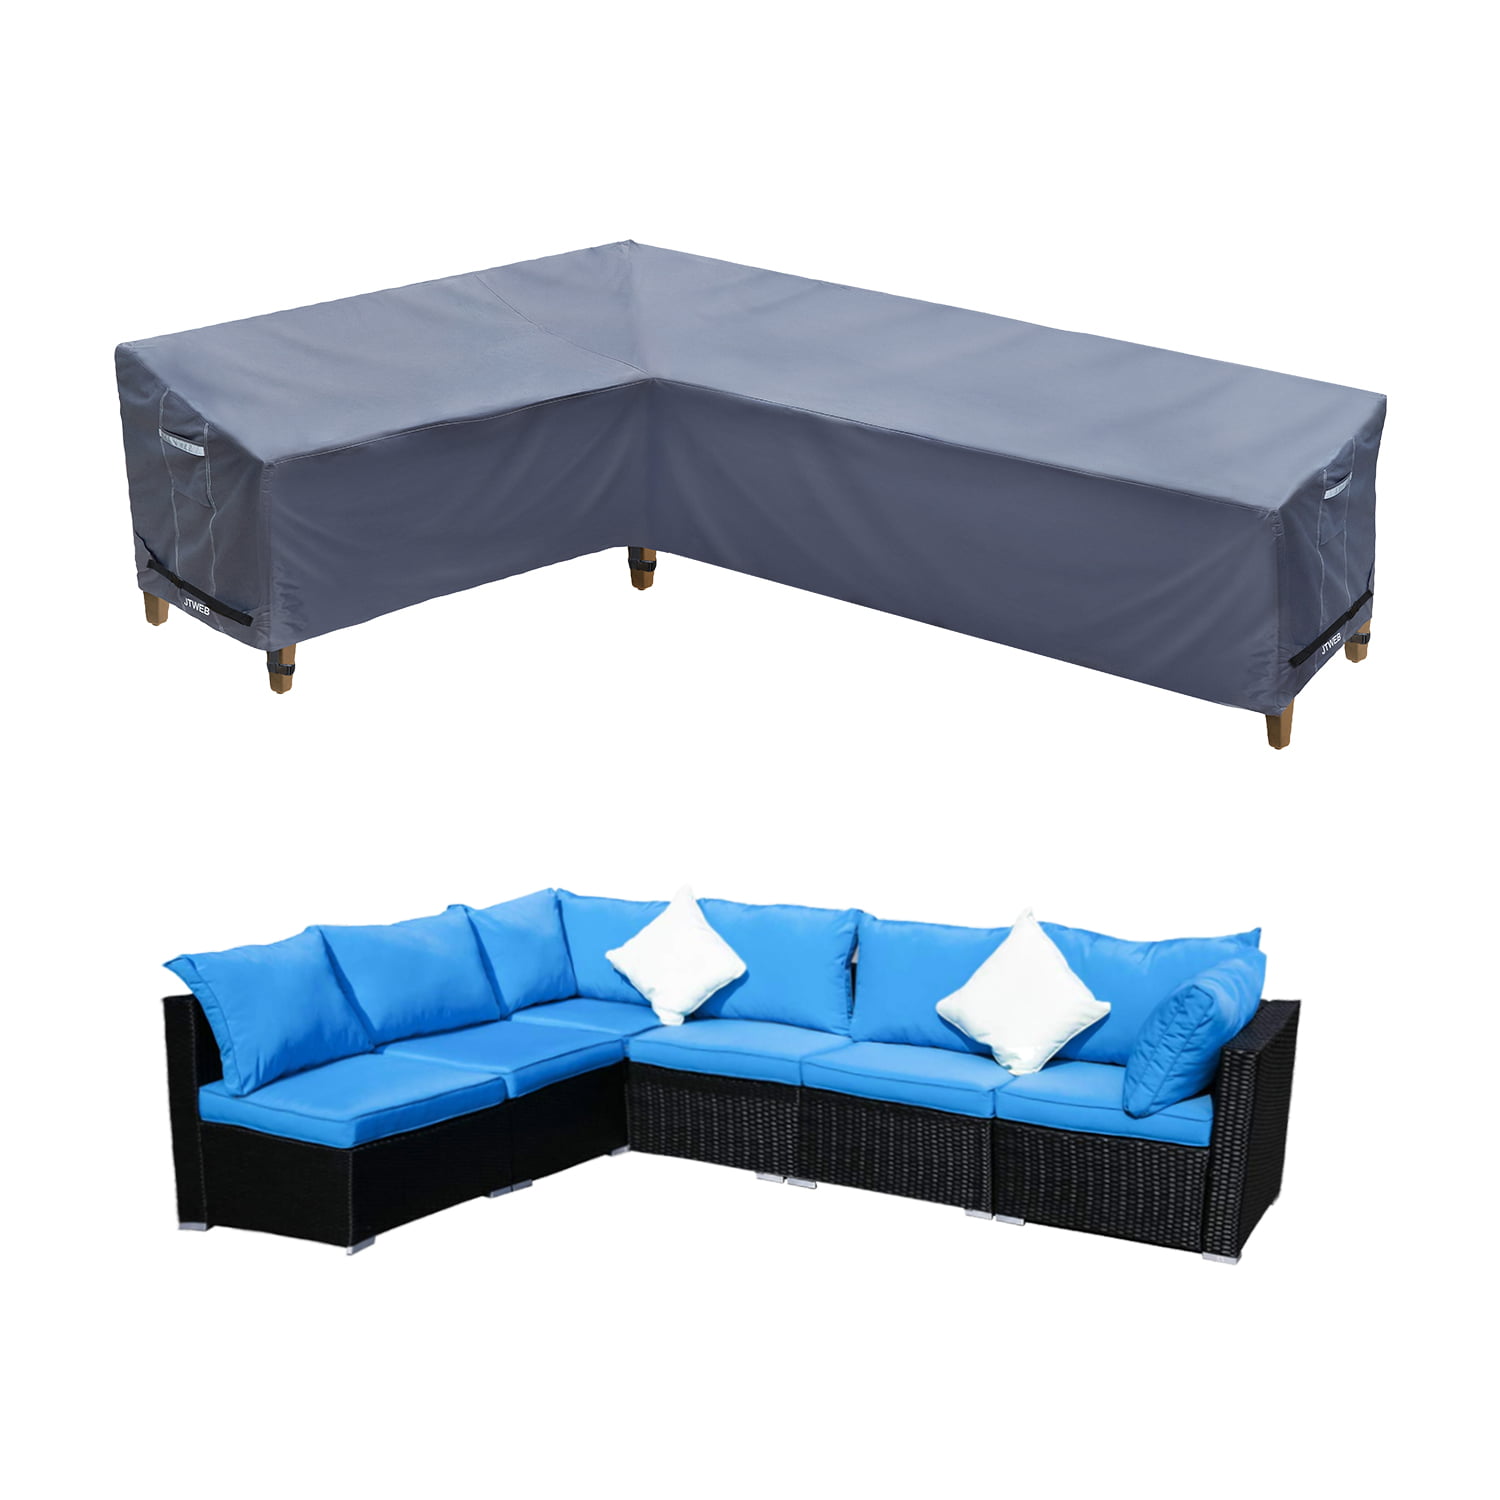 Patio Furniture Covers Heavy Duty Material Water and Weather Resistant Covermates Modular Sectional Sofa Cover Charcoal 